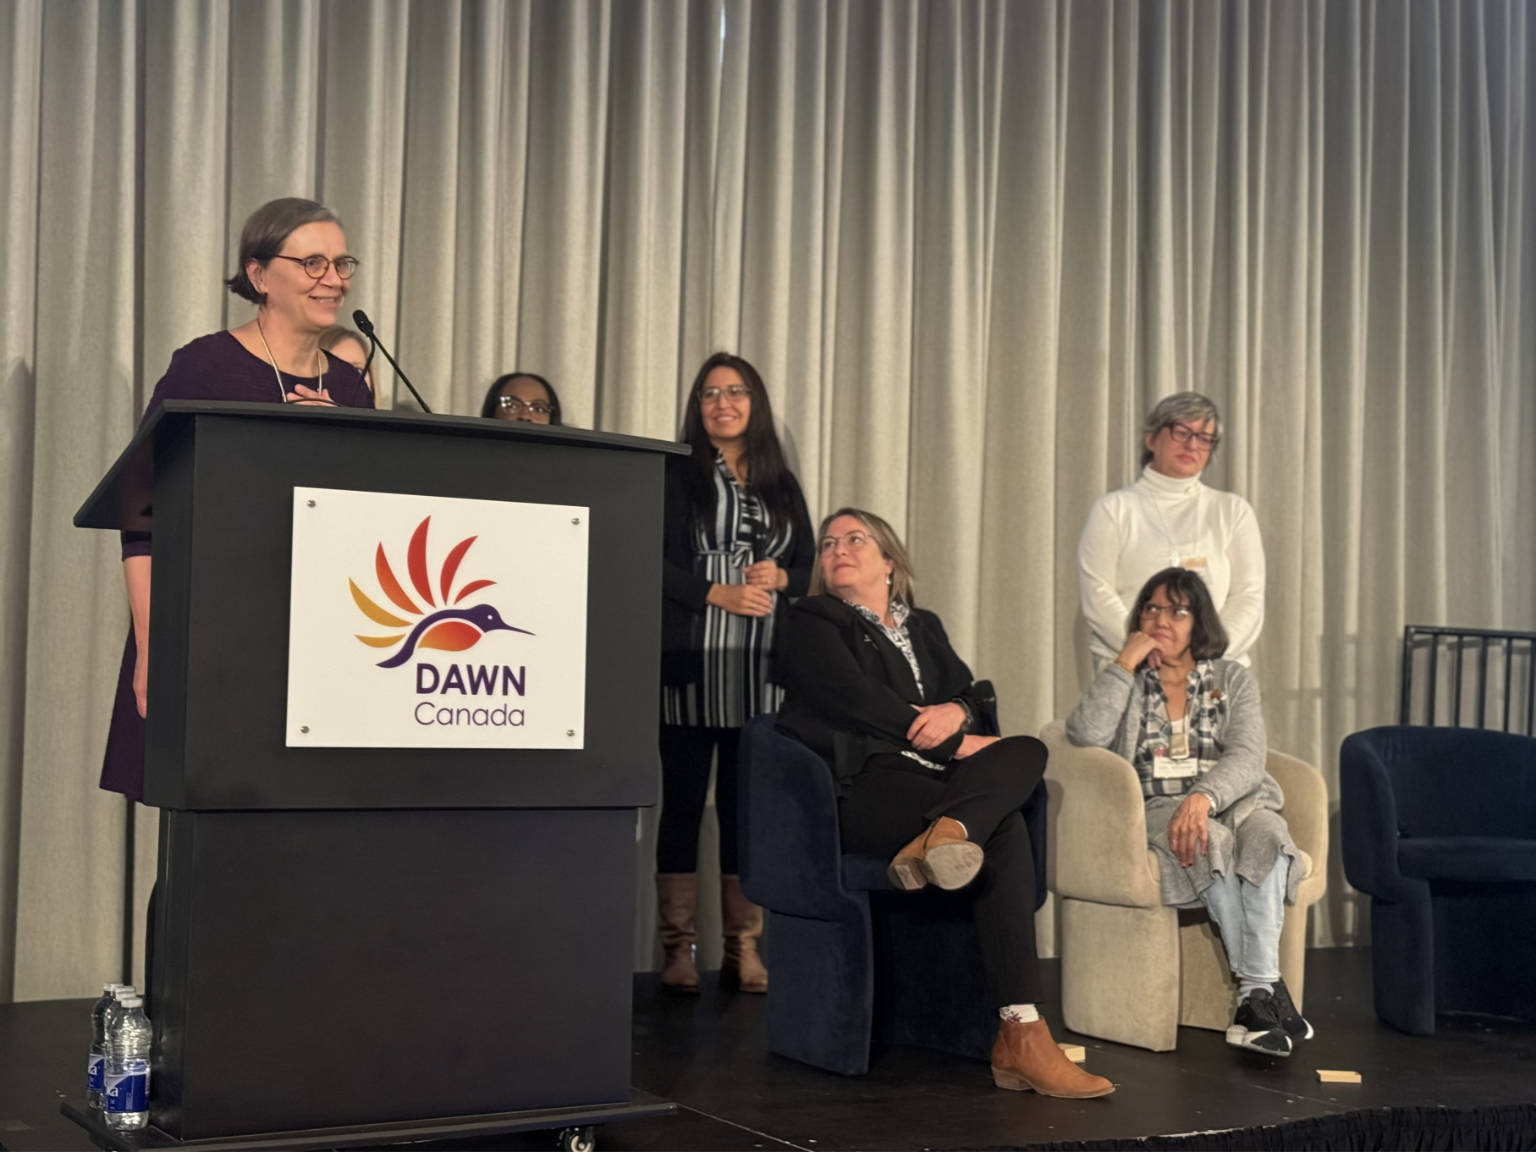 Photo of the 2023 Hummingbird Awards Recipients, Sandra Pronteau and Deborah Stienstra from the Live Work Well Research Centre, standing on stage with Maureen Haan from the CCRW and Evelyn Huntjens and Bonnie Brayton from DAWN Canada